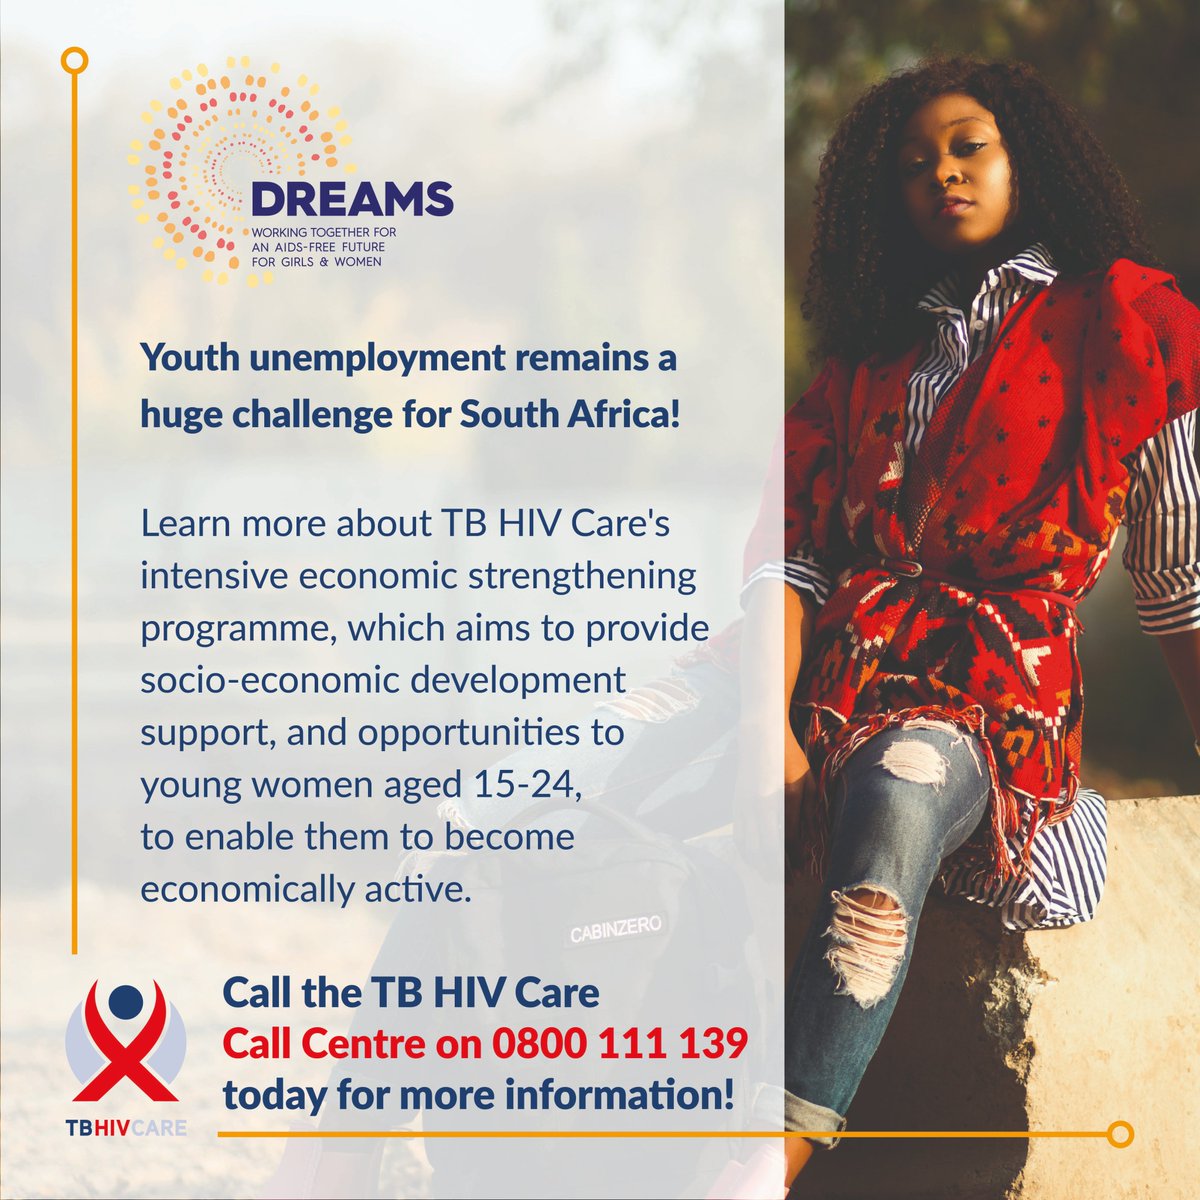 Learn about TB HIV Care's intensive economic strengthening programme, which aims to provide socio-economic development support, and opportunities to young women aged 15-24. Contact our Call Centre on 0800 111 139 (Monday to Friday) for more information! #zimisele #empowerment